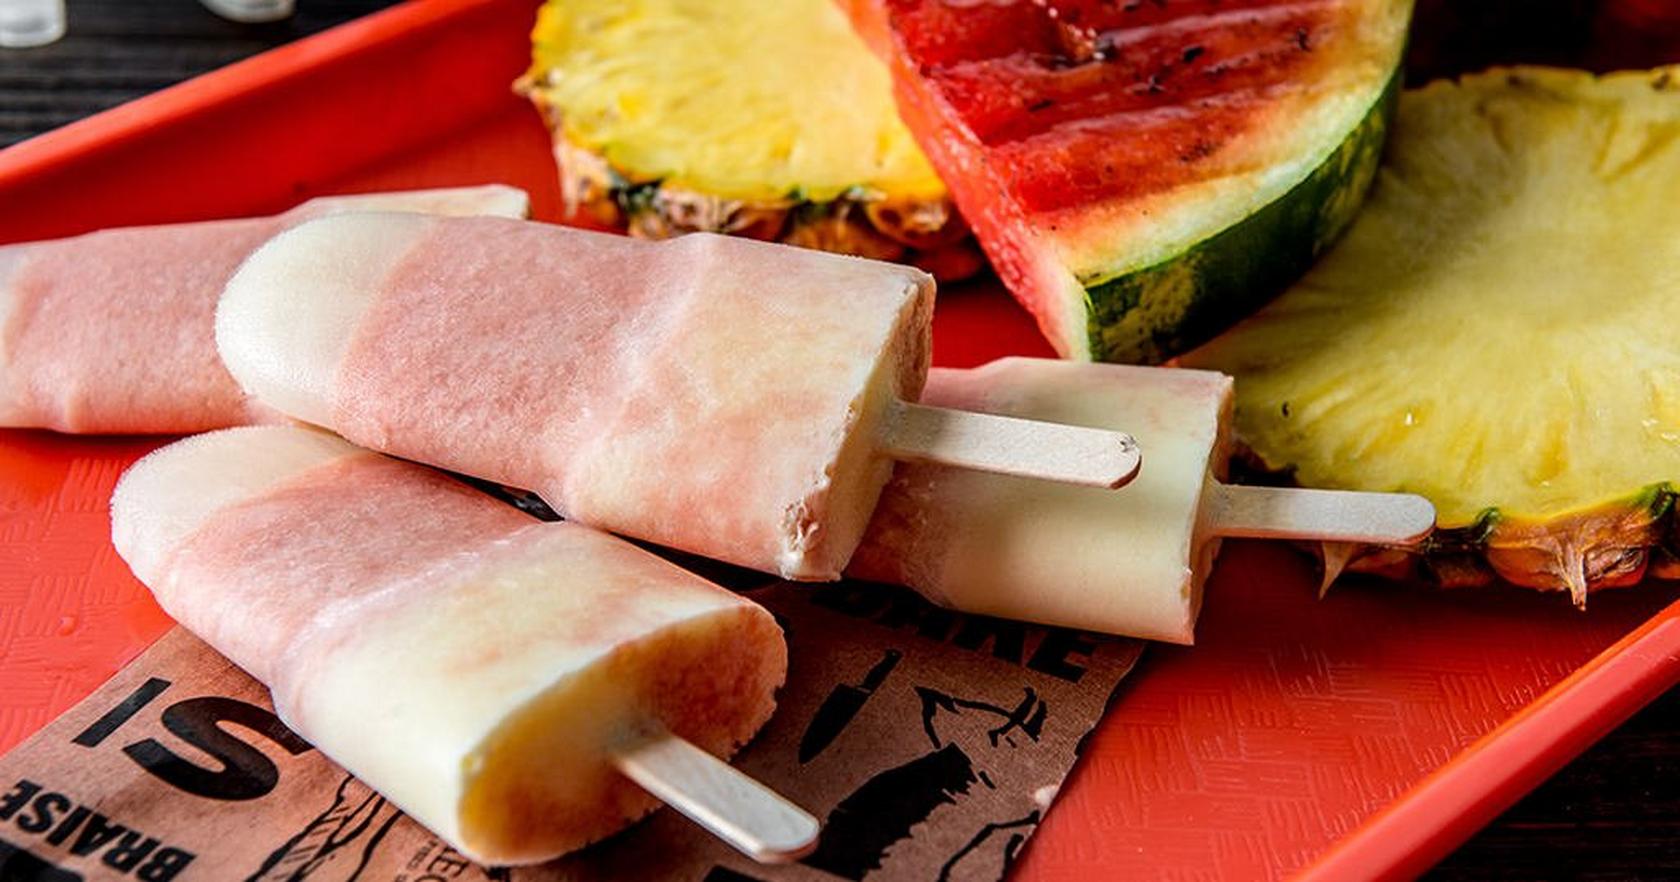 Grilled Pineapple & Watermelon Creamsicles